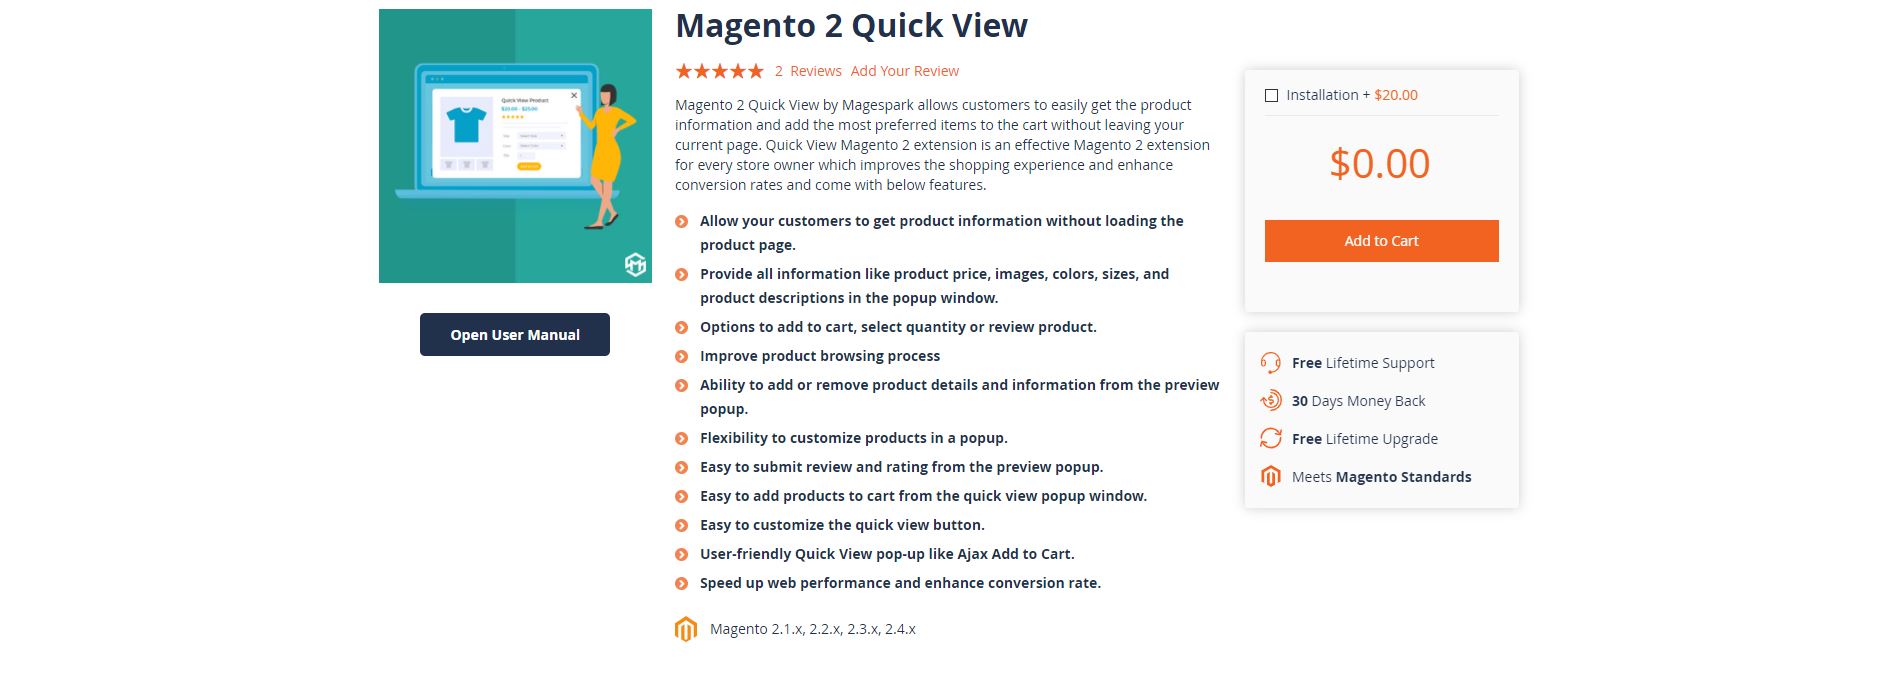 Magento Quick View extension